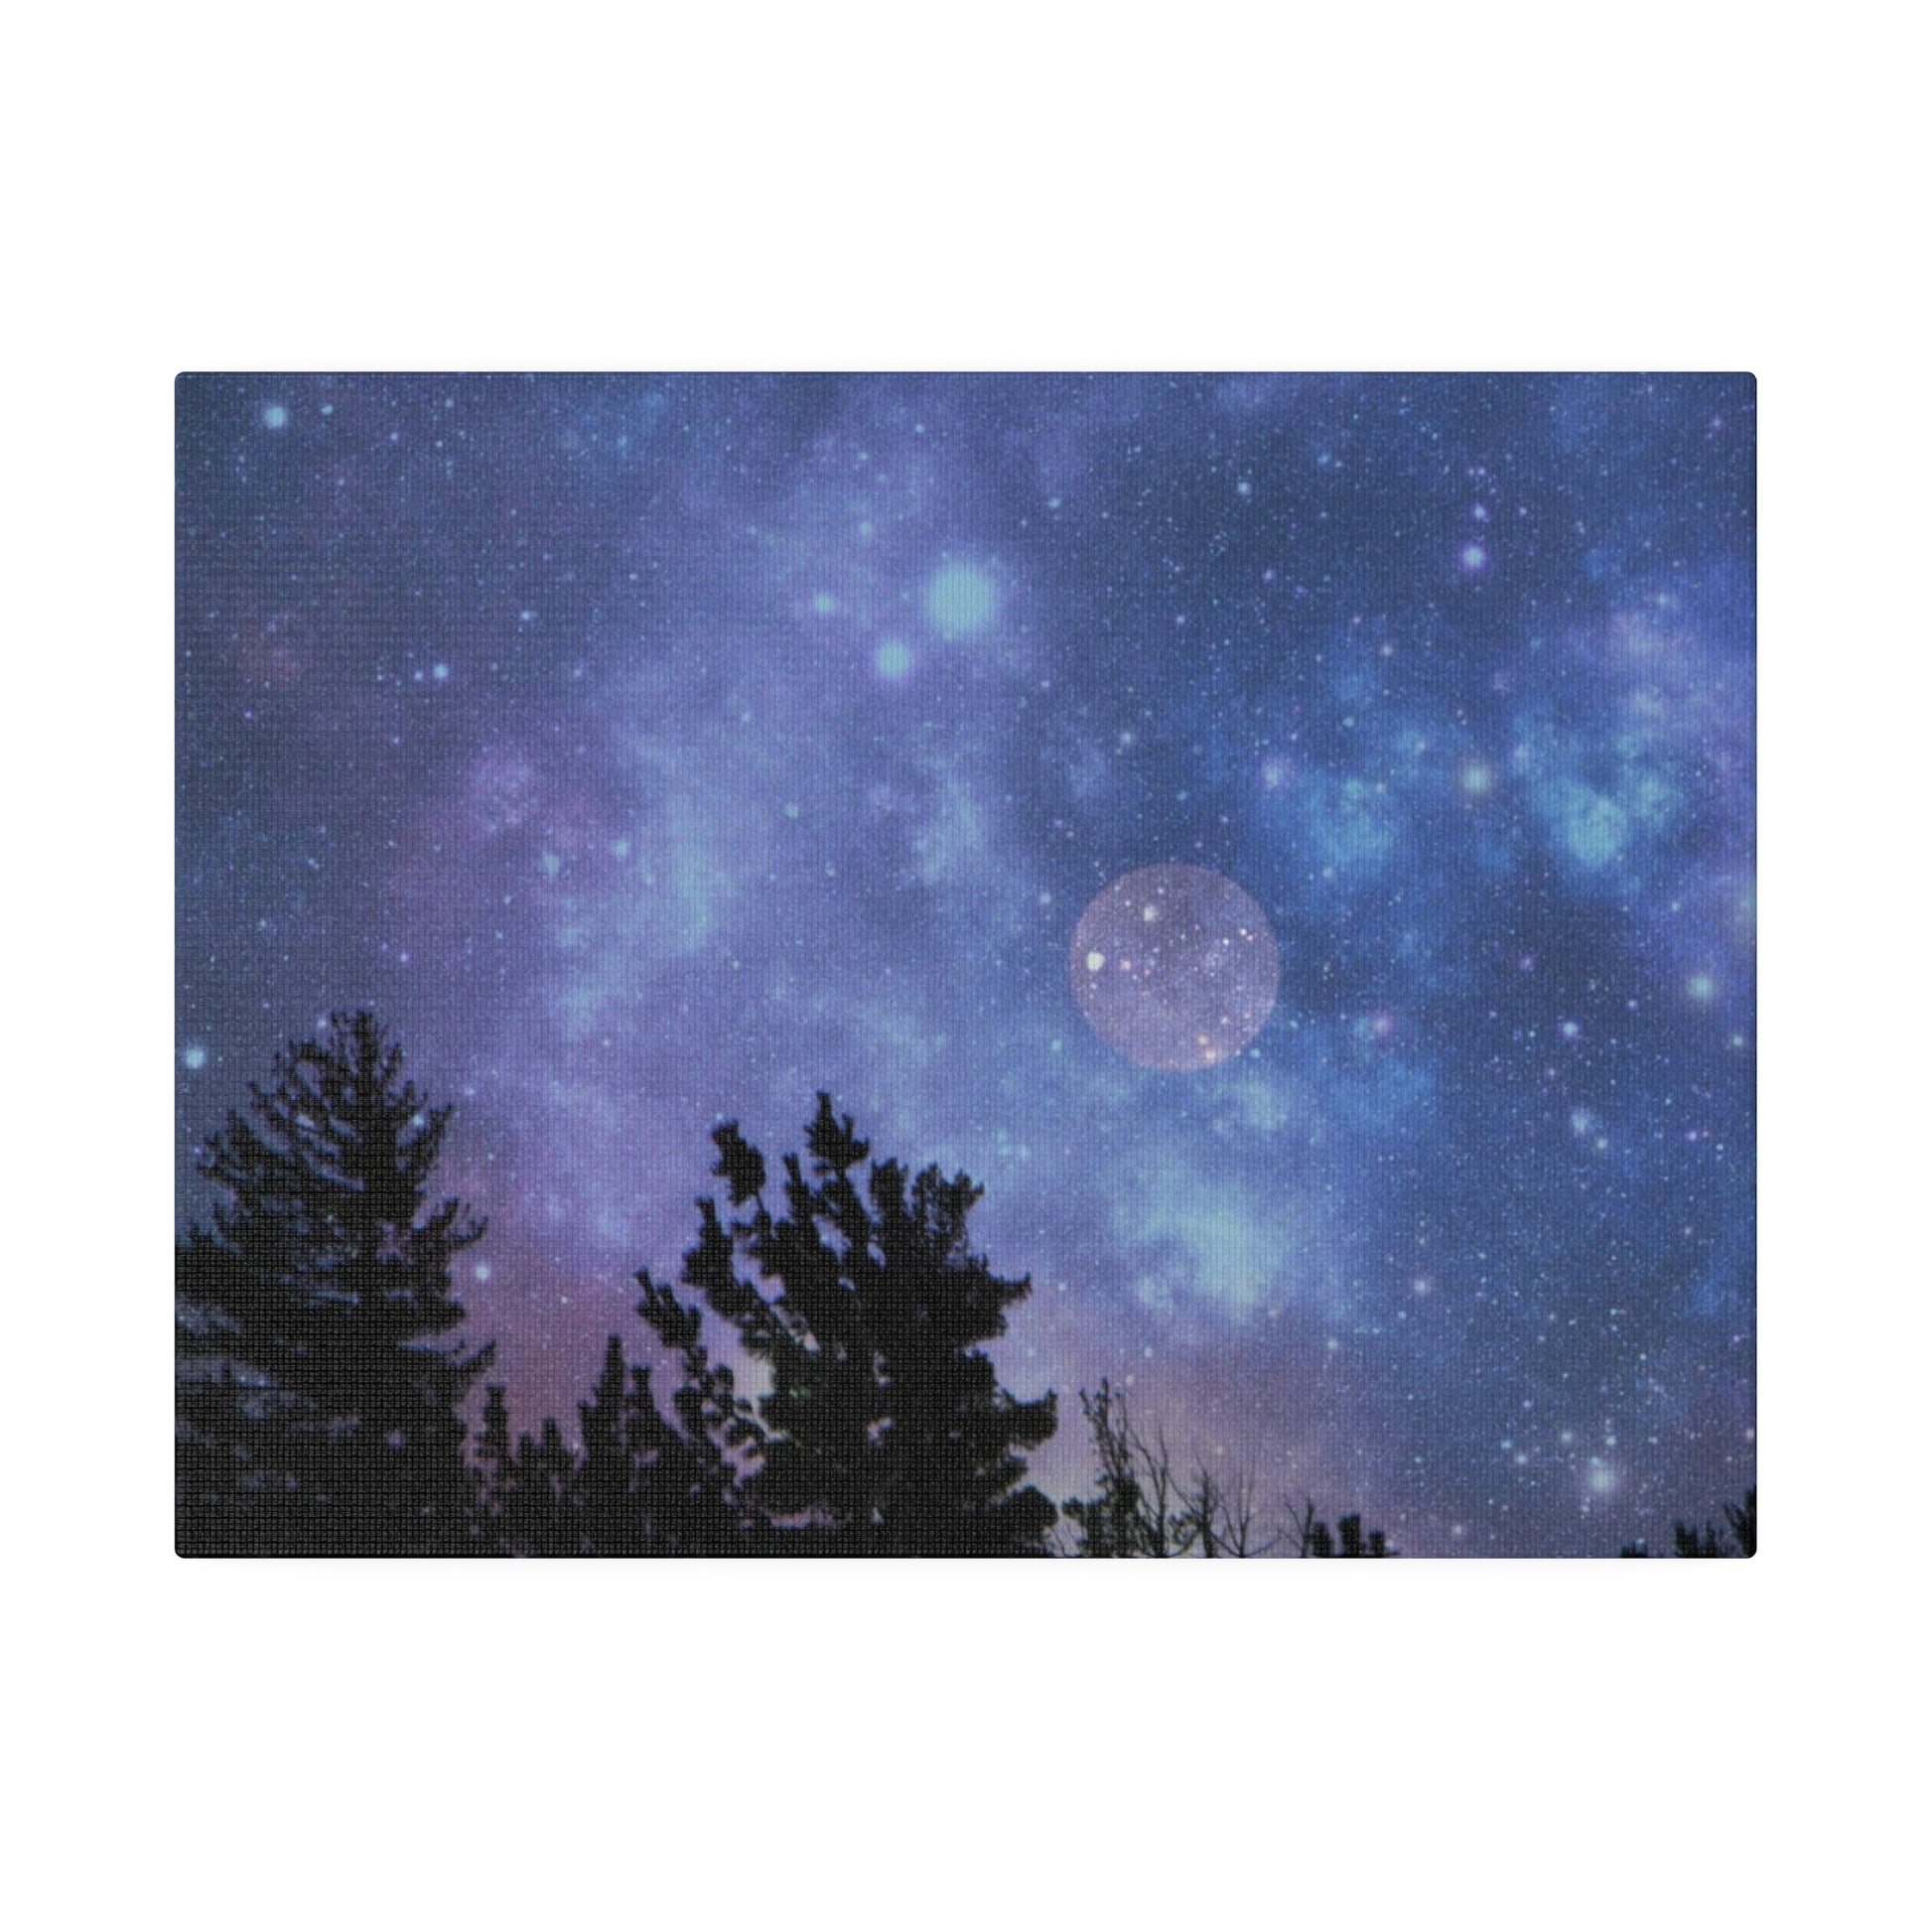 Star-filled night sky with visible milky way and a silhouette of pine trees in the foreground, encased in a radial pine frame sourced from renewable forests, printed on a Blue-Moon Matte Canvas by Printify.